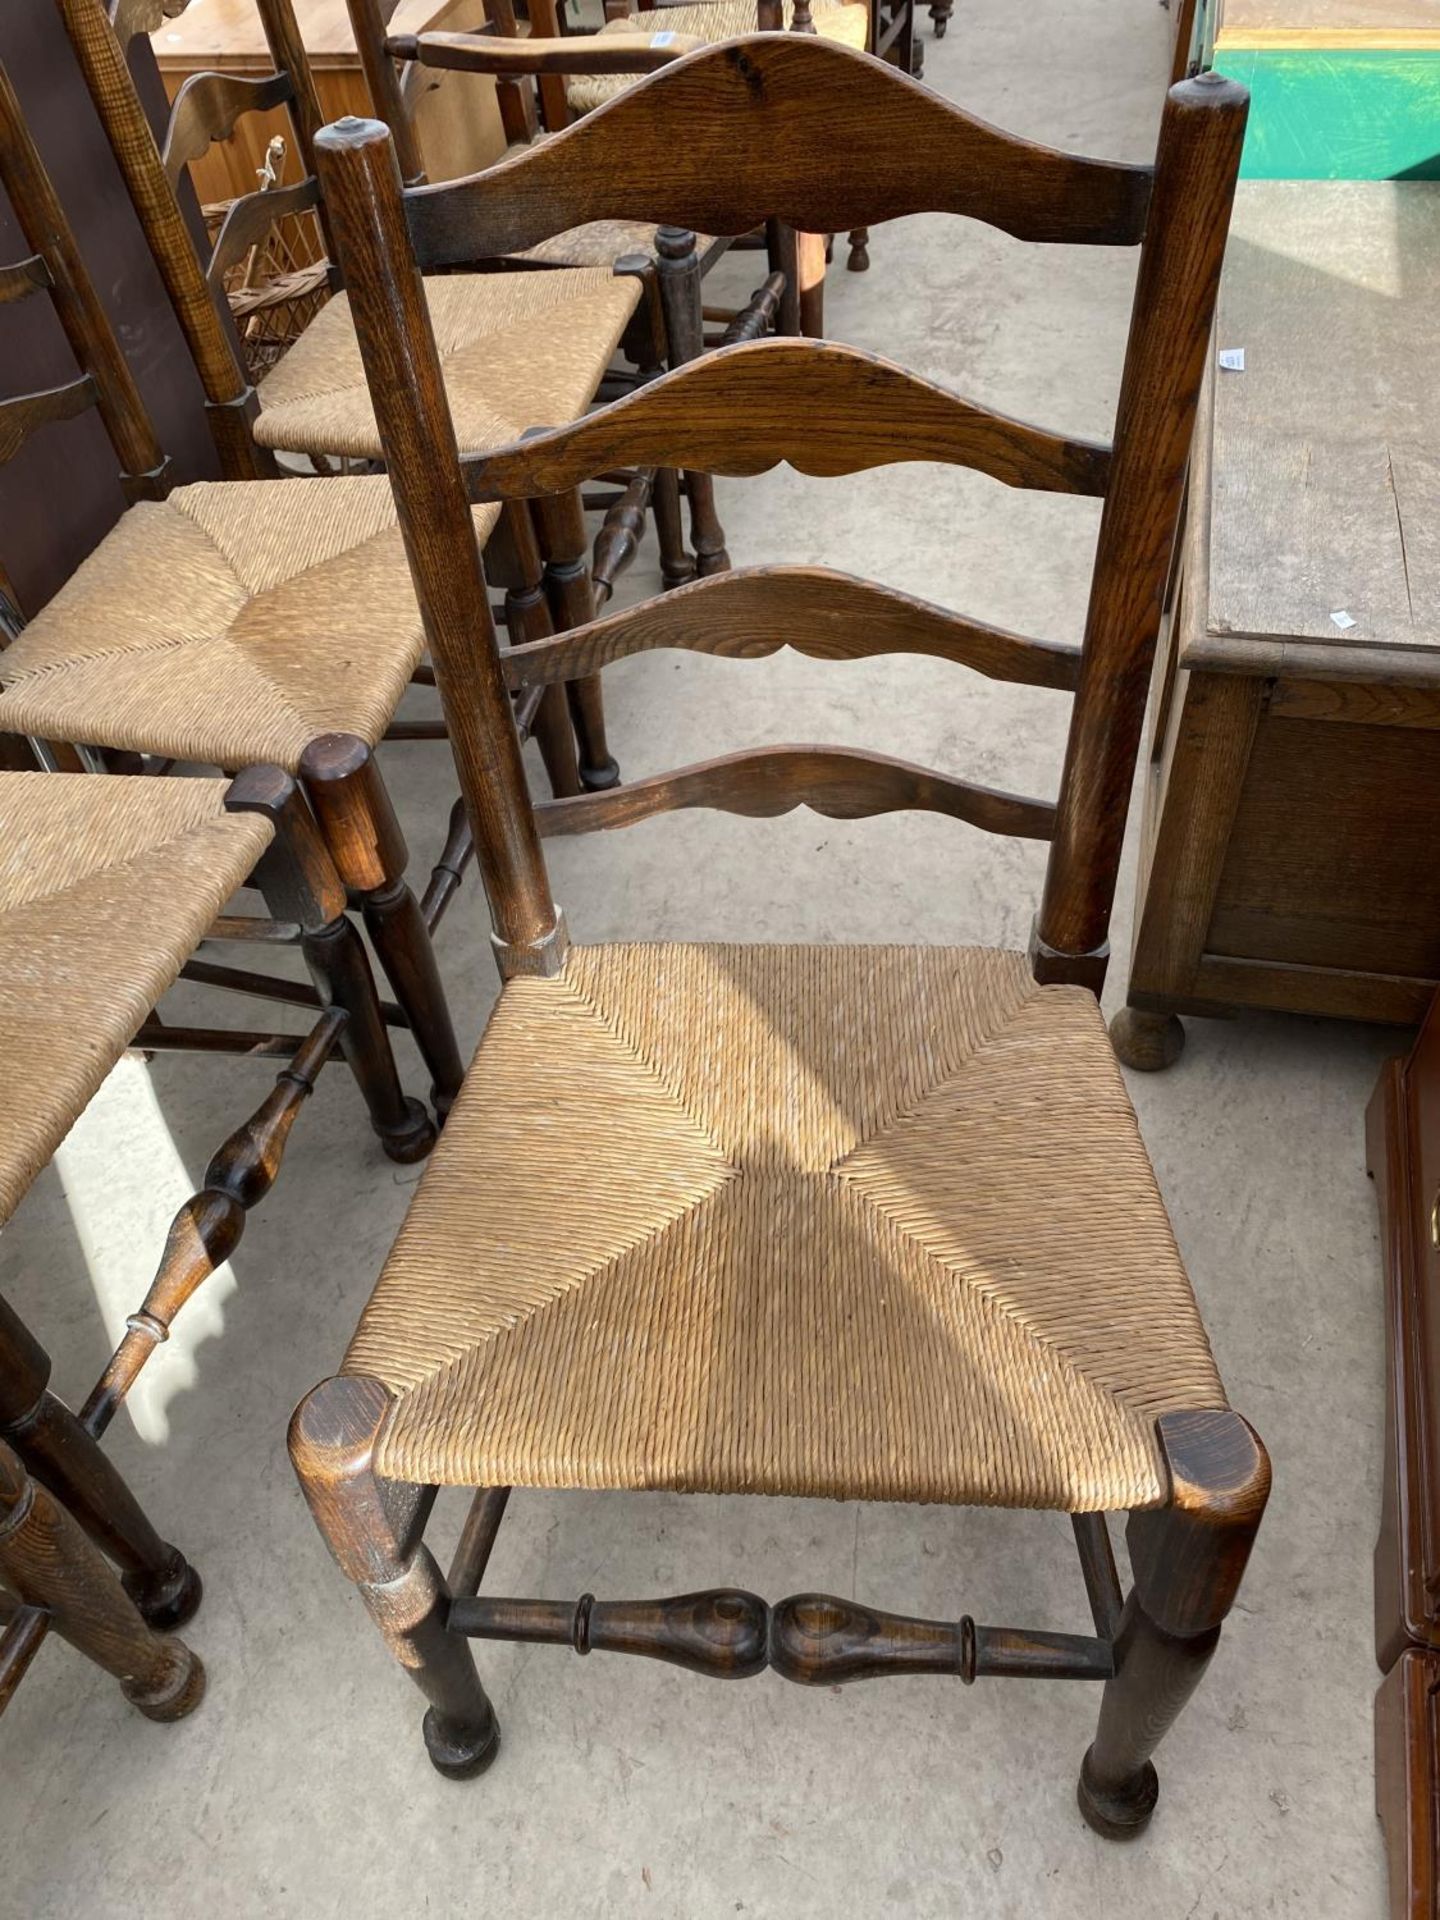 SEVEN OAK MACCLESFIELD DINING CHAIRS WITH LADDER BACKS AND RUSH SEATS - Image 2 of 6